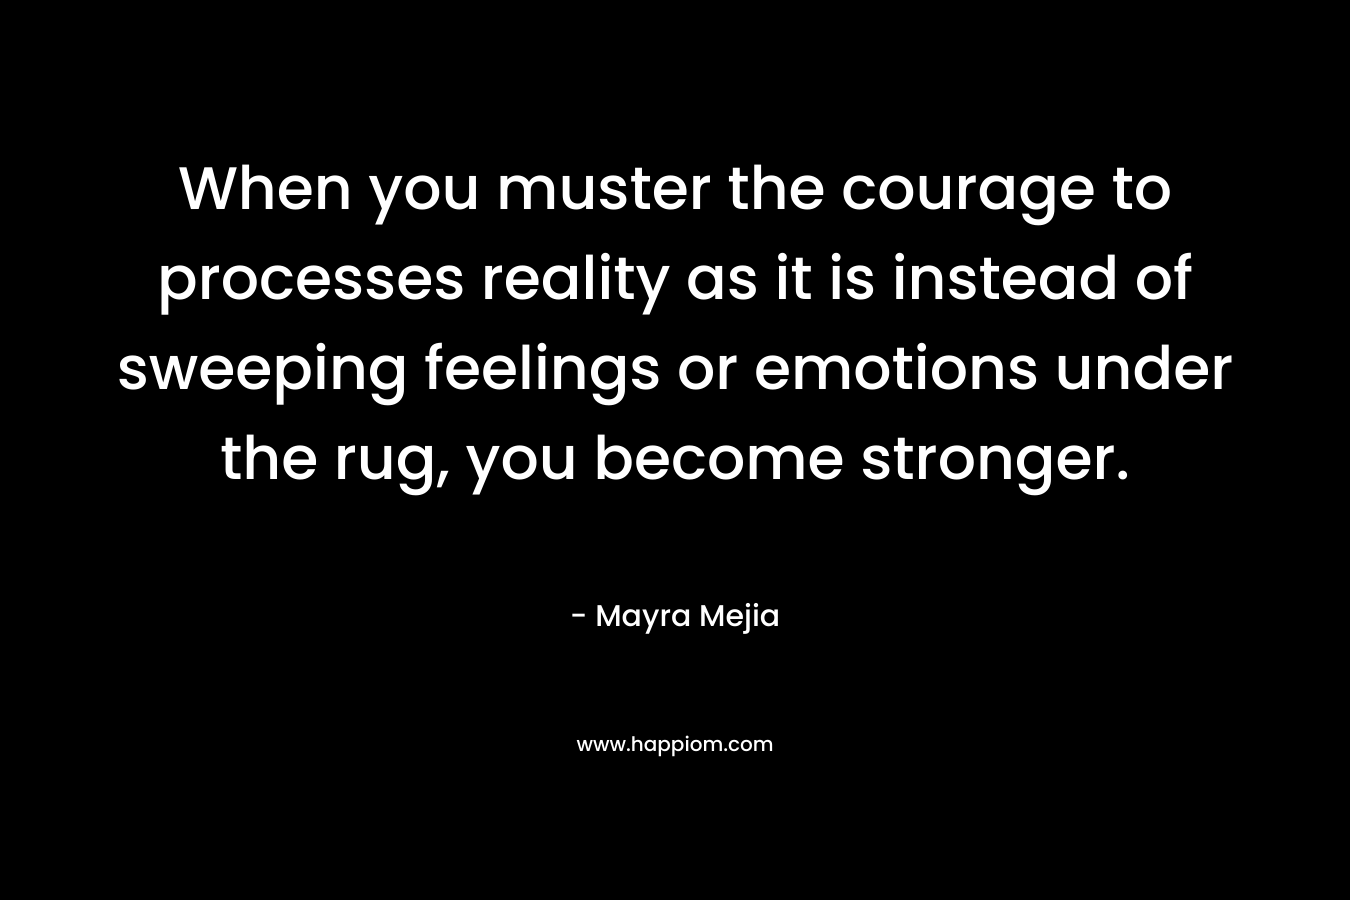 When you muster the courage to processes reality as it is instead of sweeping feelings or emotions under the rug, you become stronger. – Mayra Mejia